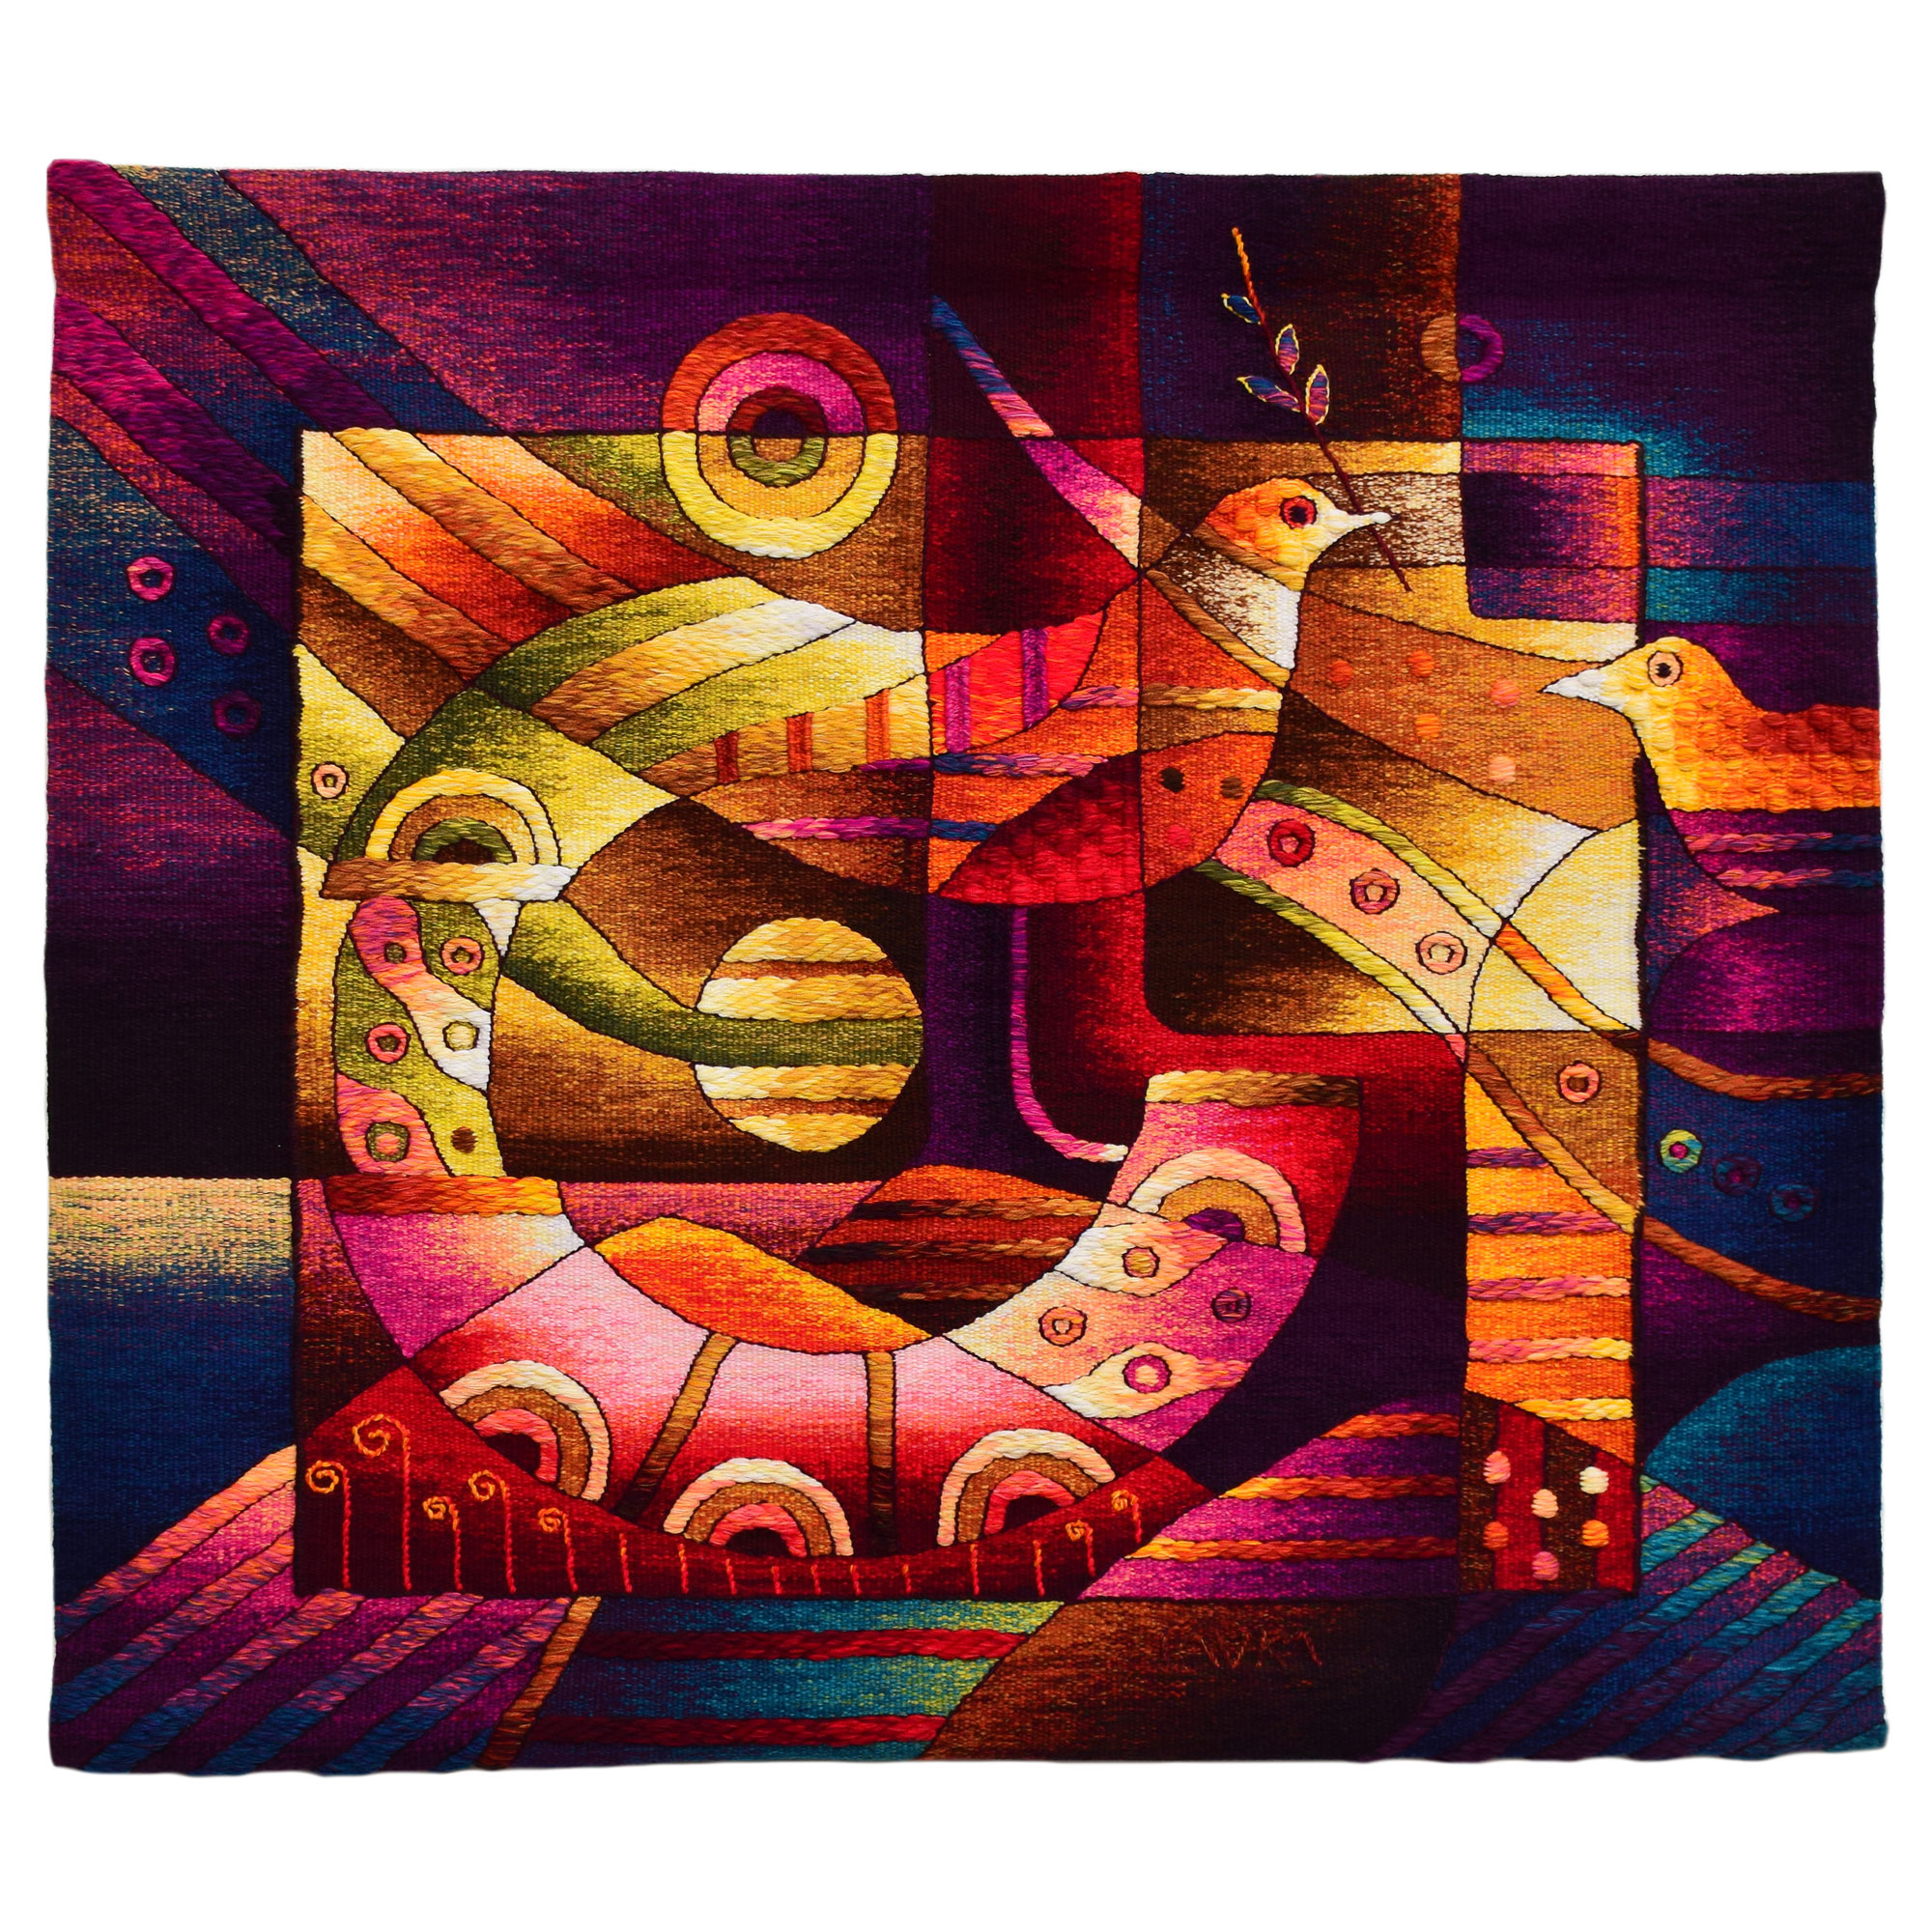 Mousus Pround Las Vegas City View Decorative Tapestry Tapestries American  Nevada State Las Vegas Tapestry Wall Hanging Home Wall Art Decor for Living